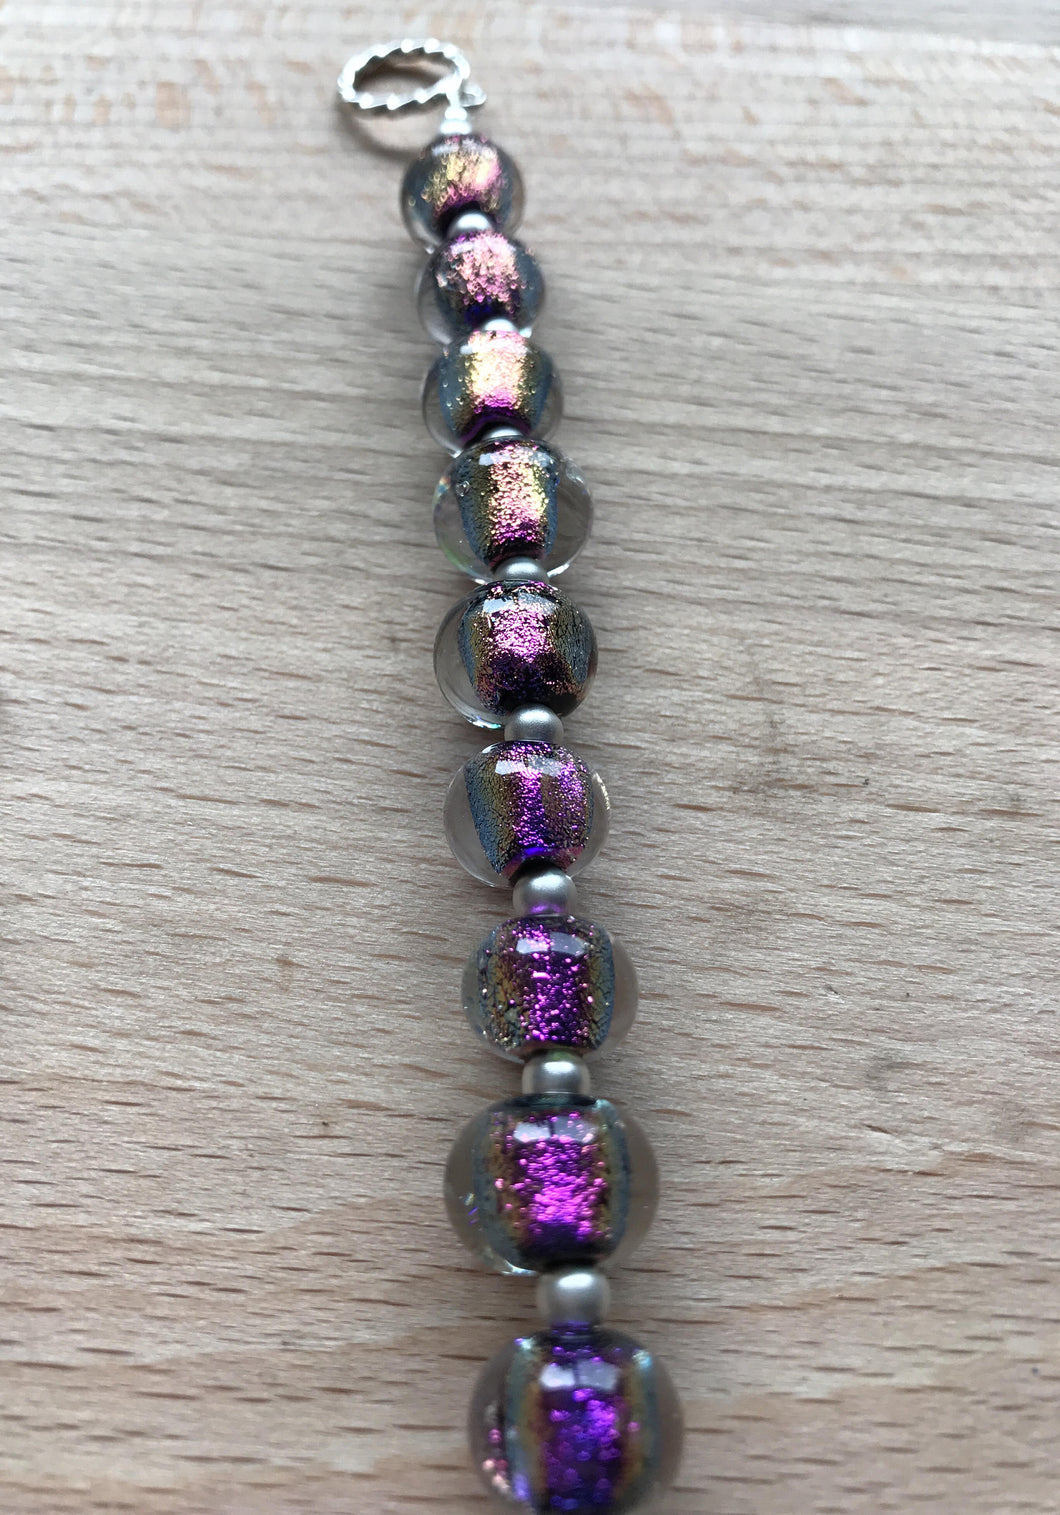 Sparkling pink bracelet, made with small glass beads and sterling silv –  Perle di Vetro